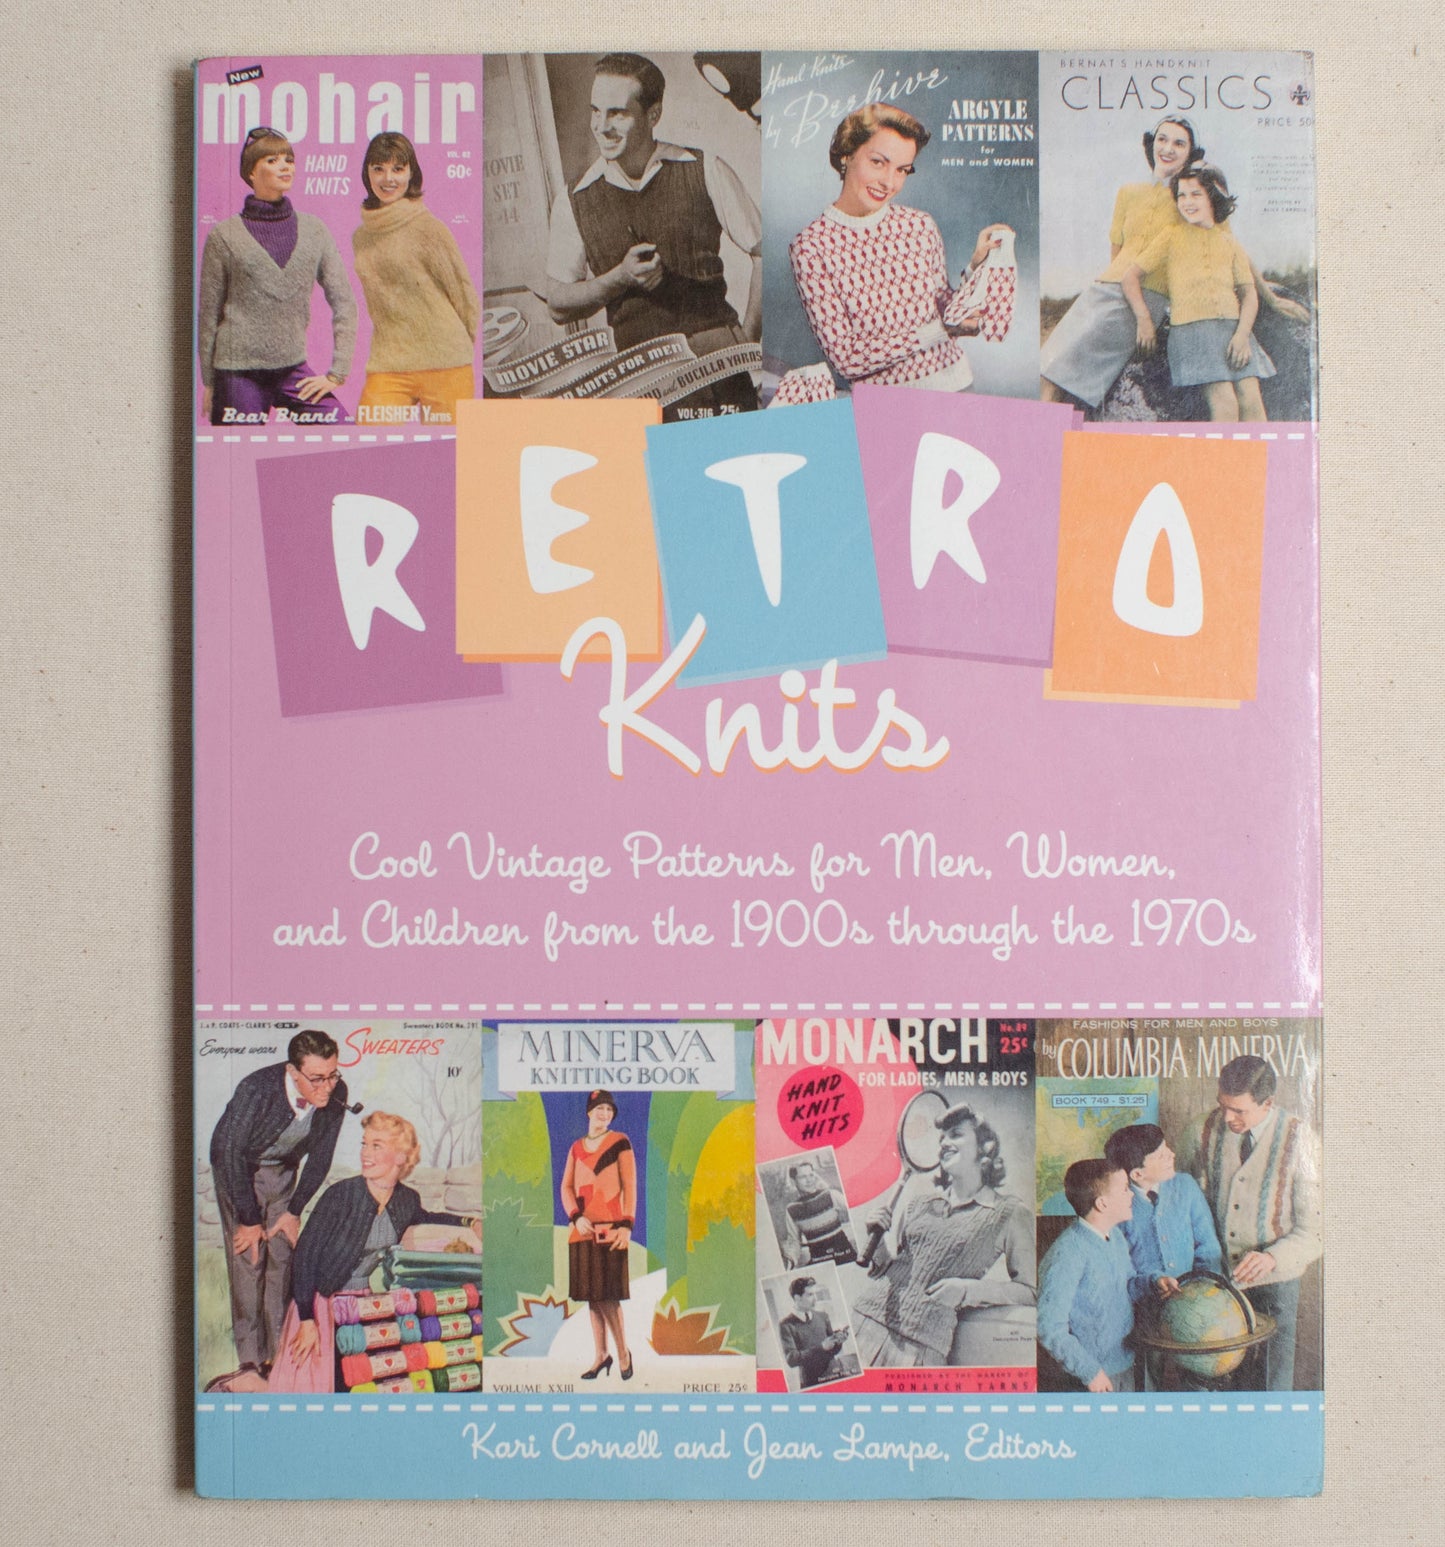 Retro Knits: Cool Vintage Patterns for Men, Women, and Children from the 1900s through the 1970s: Cool Vintage Patterns for Men Women and Children from the 1900's Through the 1970's